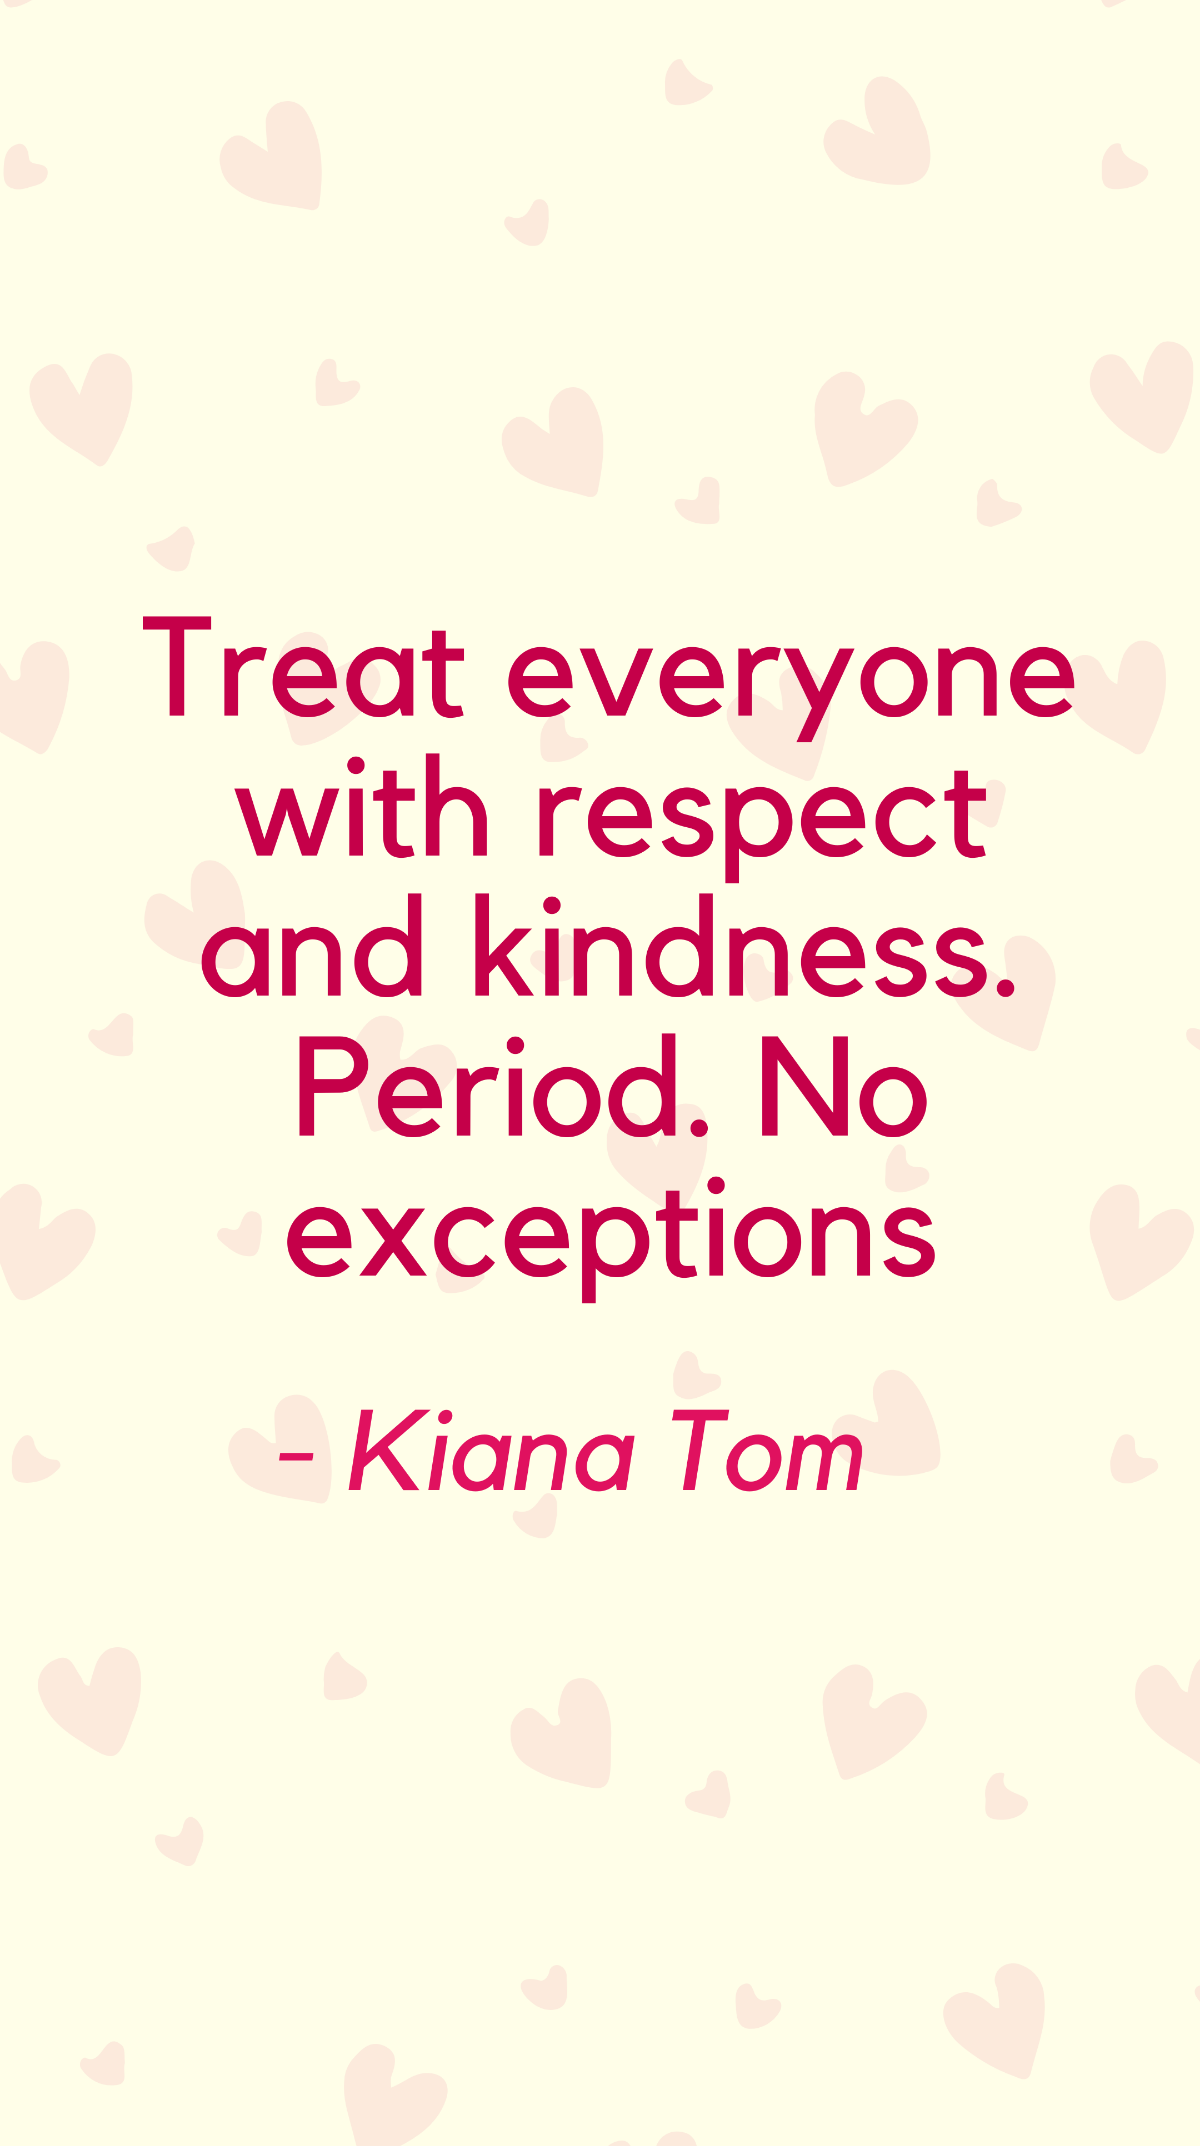 Free Kiana Tom - Treat everyone with respect and kindness. Period. No exceptions Template